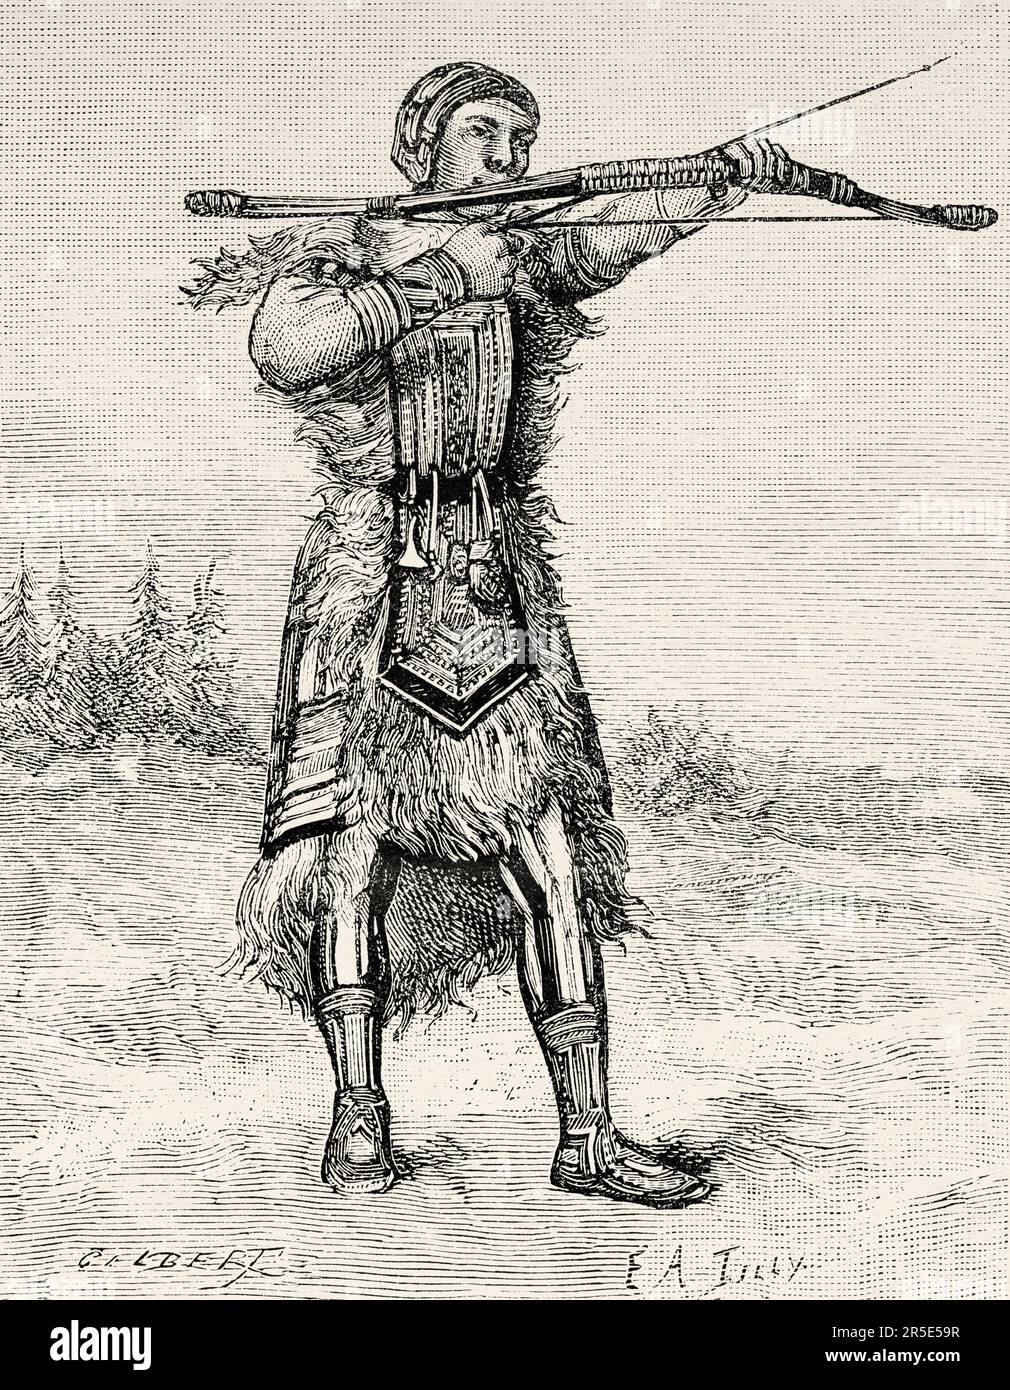 Tungusic hunter with bow and arrows, Siberia. Old 19th century engraving from La Nature 1887 Stock Photo